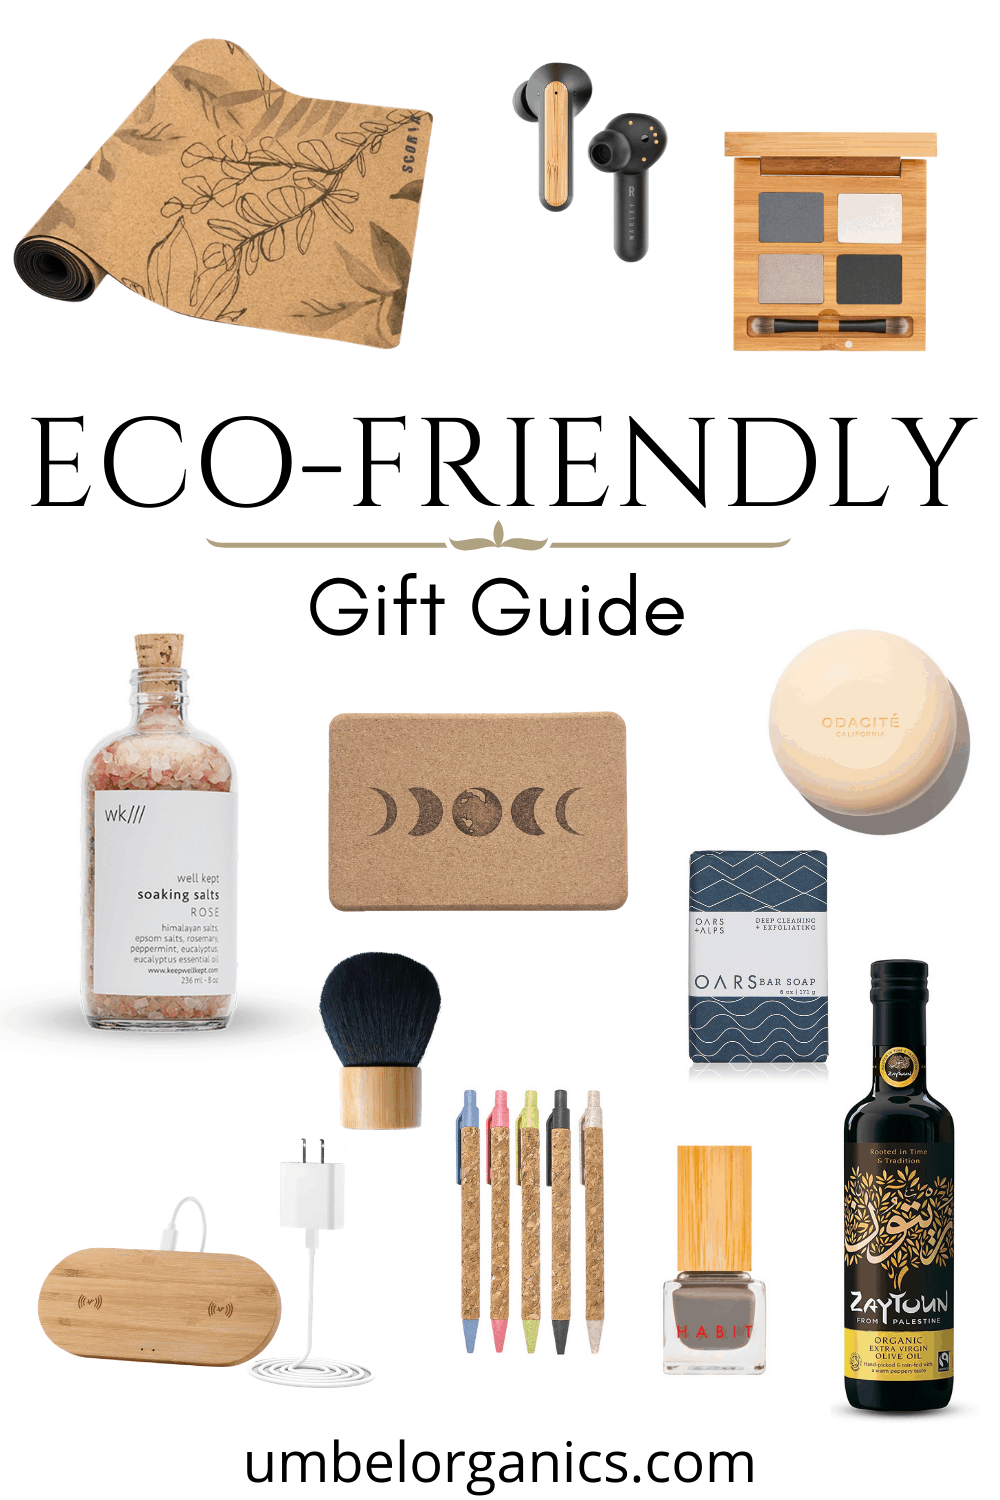 Eco-Friendly Gift Guide